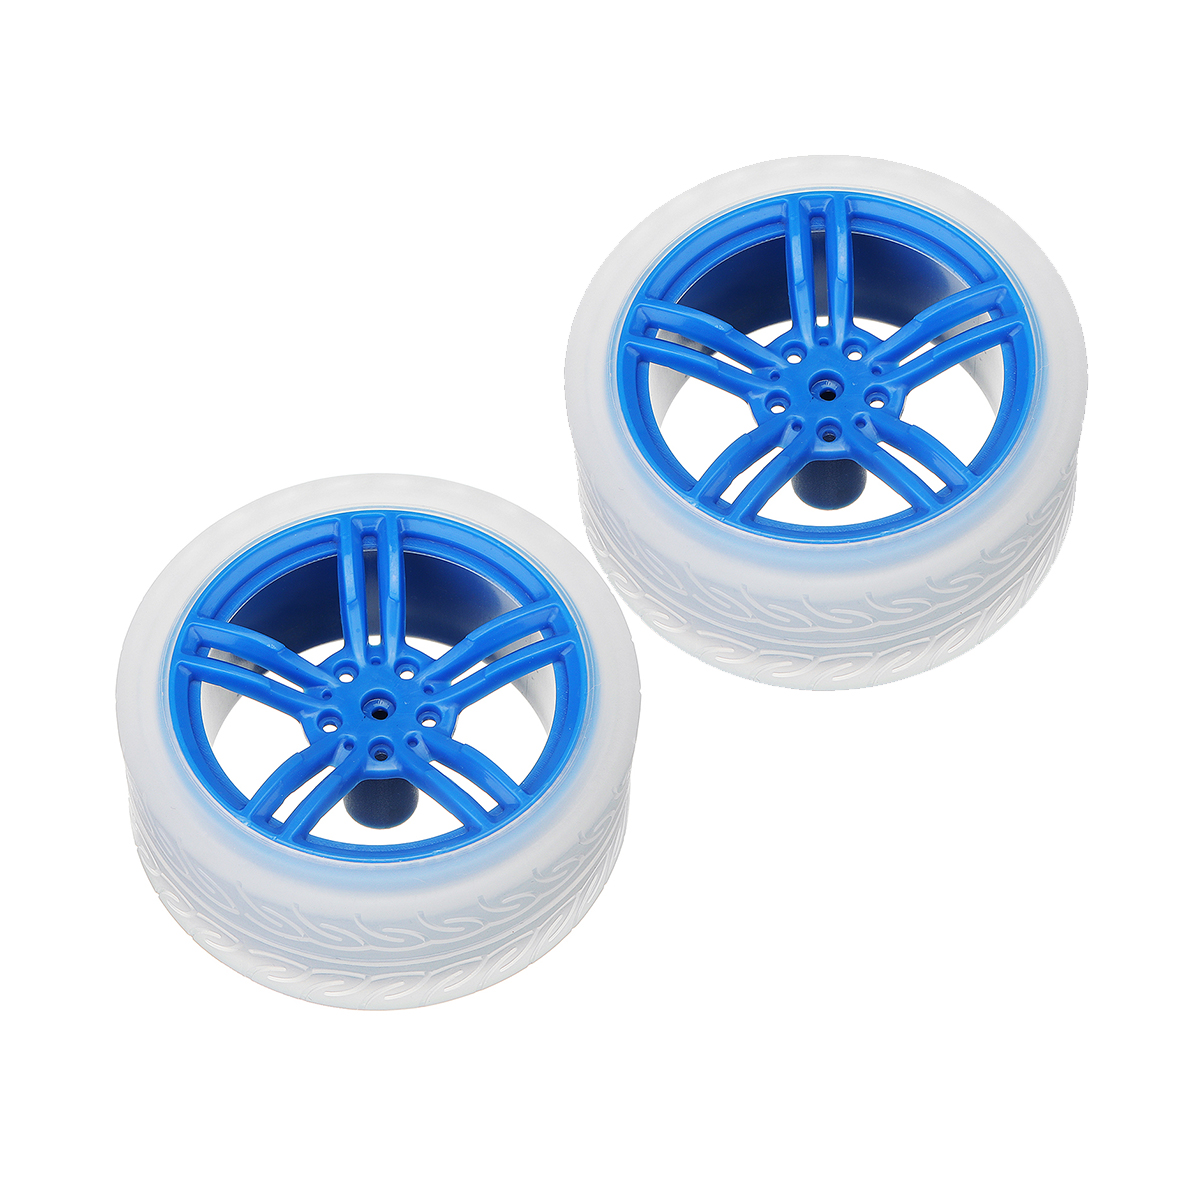 

2Pcs 65*27mm Blue Rubber Wheels for TT Motor Arduino Smart Chassis Car Accessories